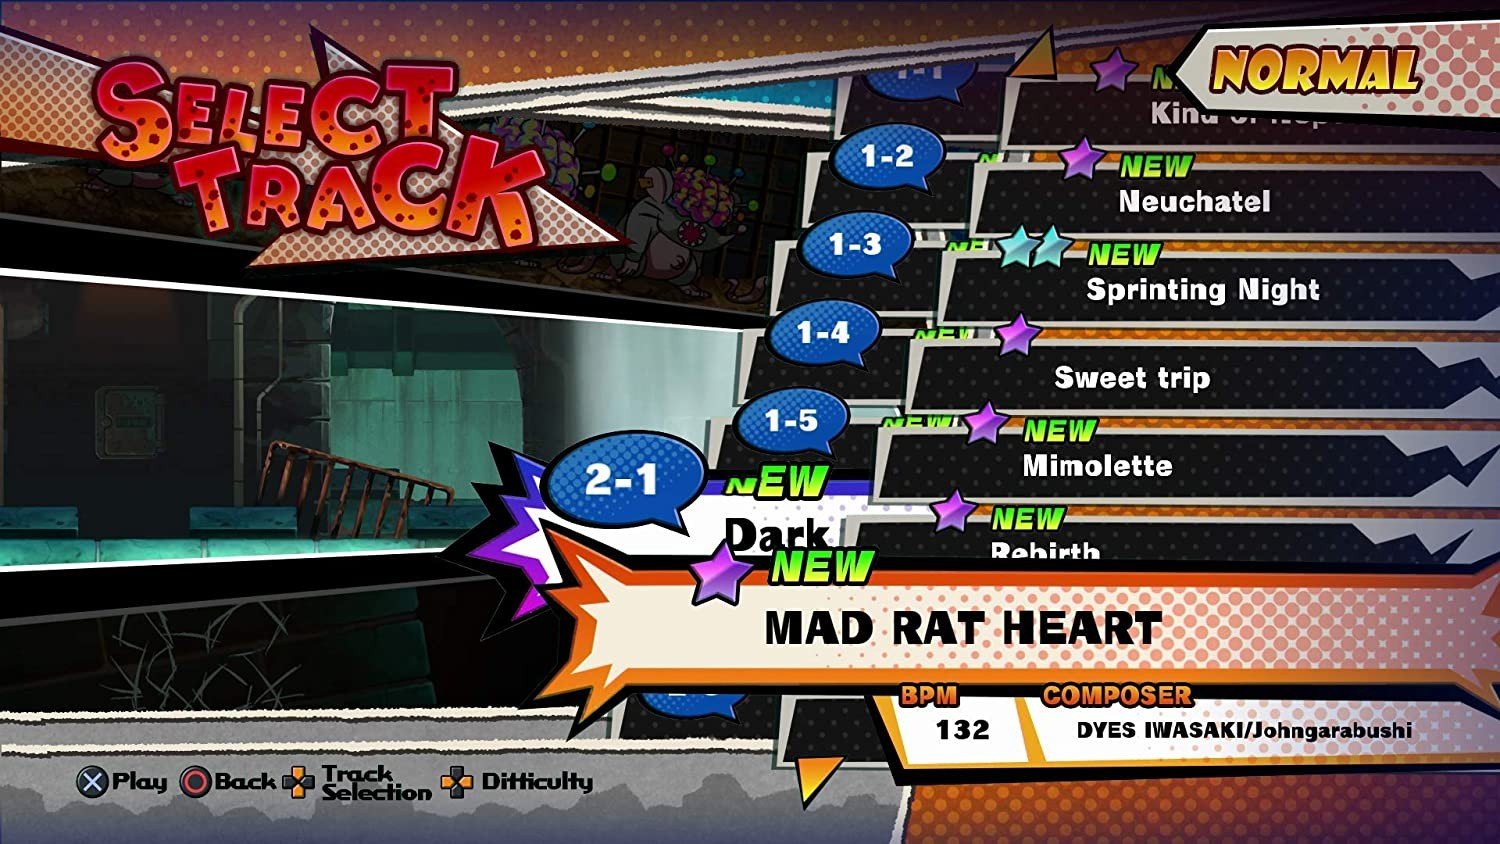 Mad Rat Dead, NIS America, Nippon Ichi Software, PS4, PlayStation 4, US, North America, Japan, release date, features, price, screenshots, trailer, pre-order, マッドラットデッド